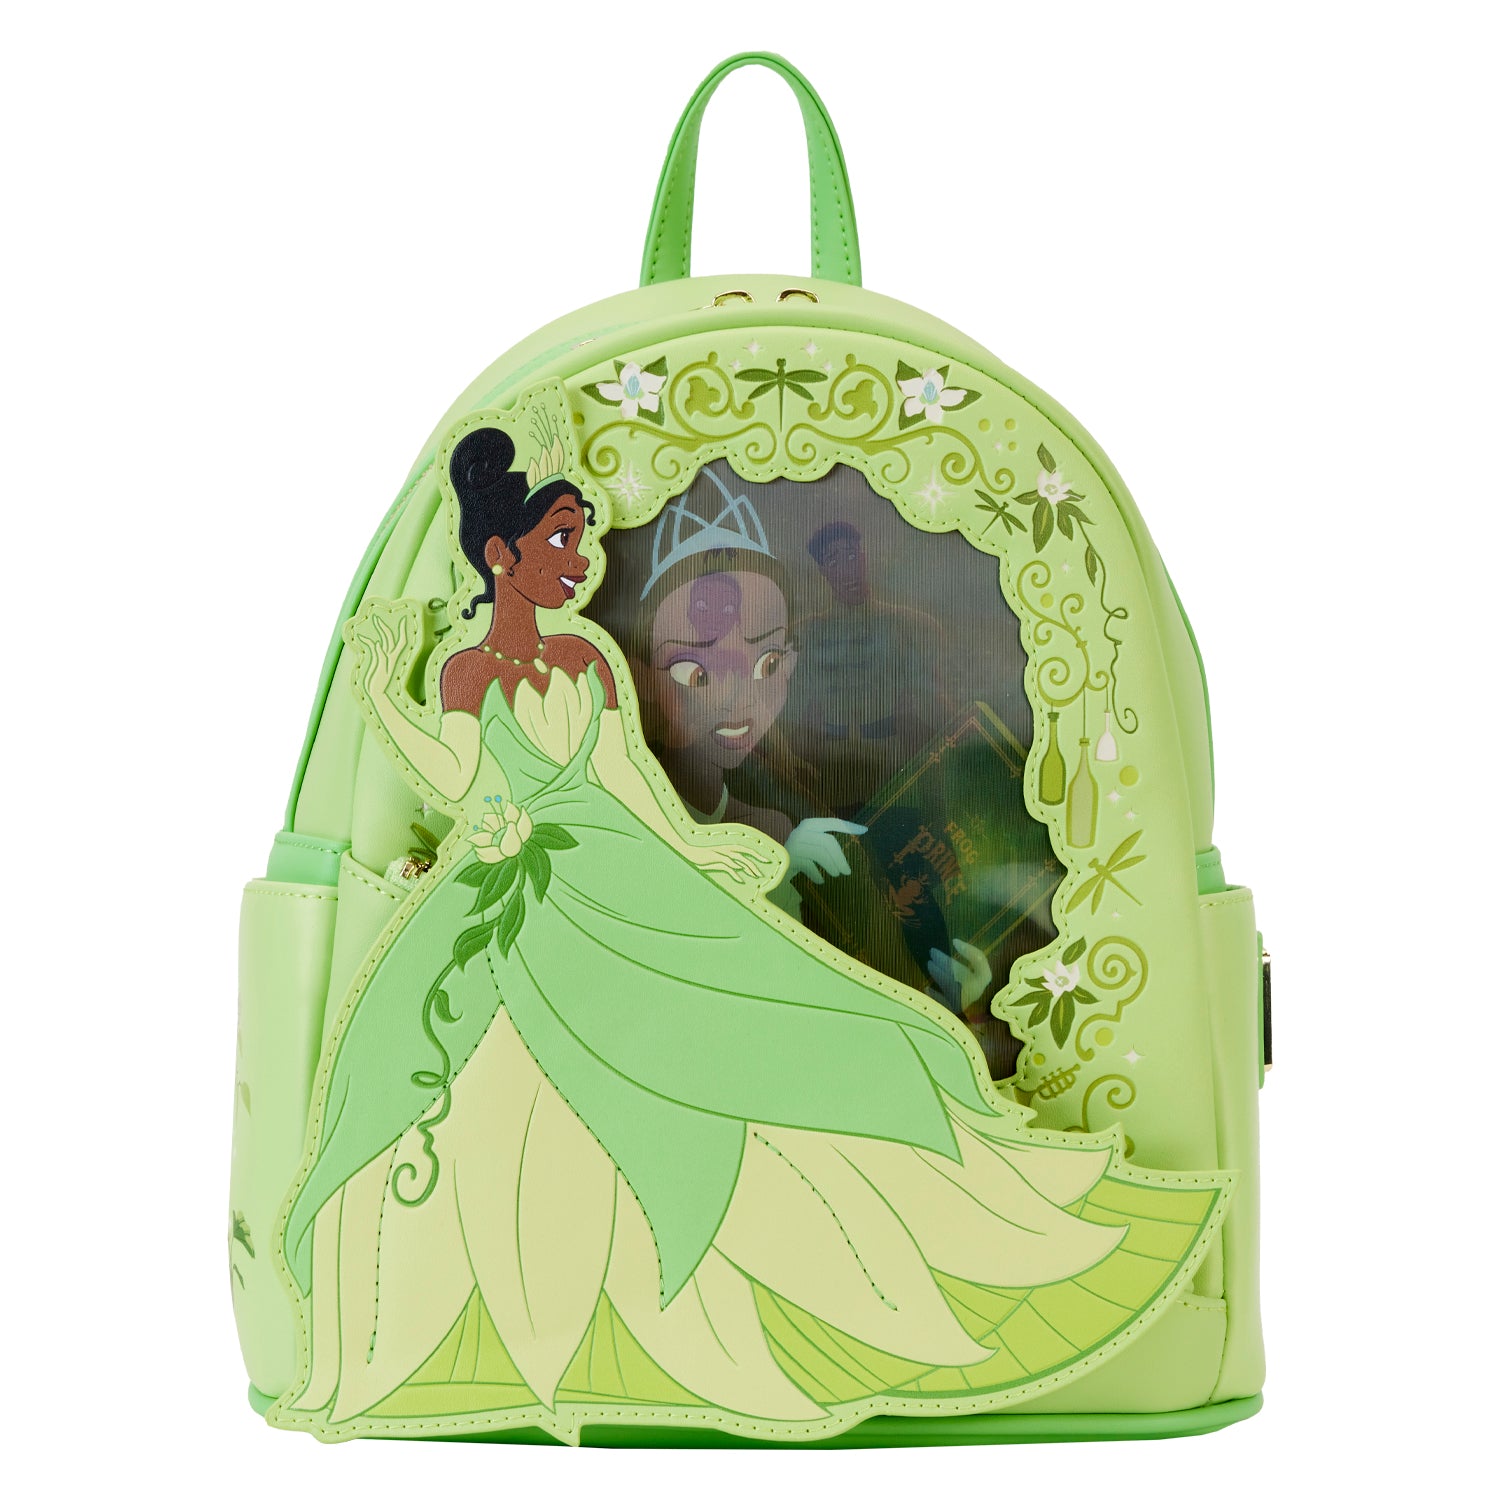 Disney Loungefly Backpack  CBC Apparel and Collectibles, LLC